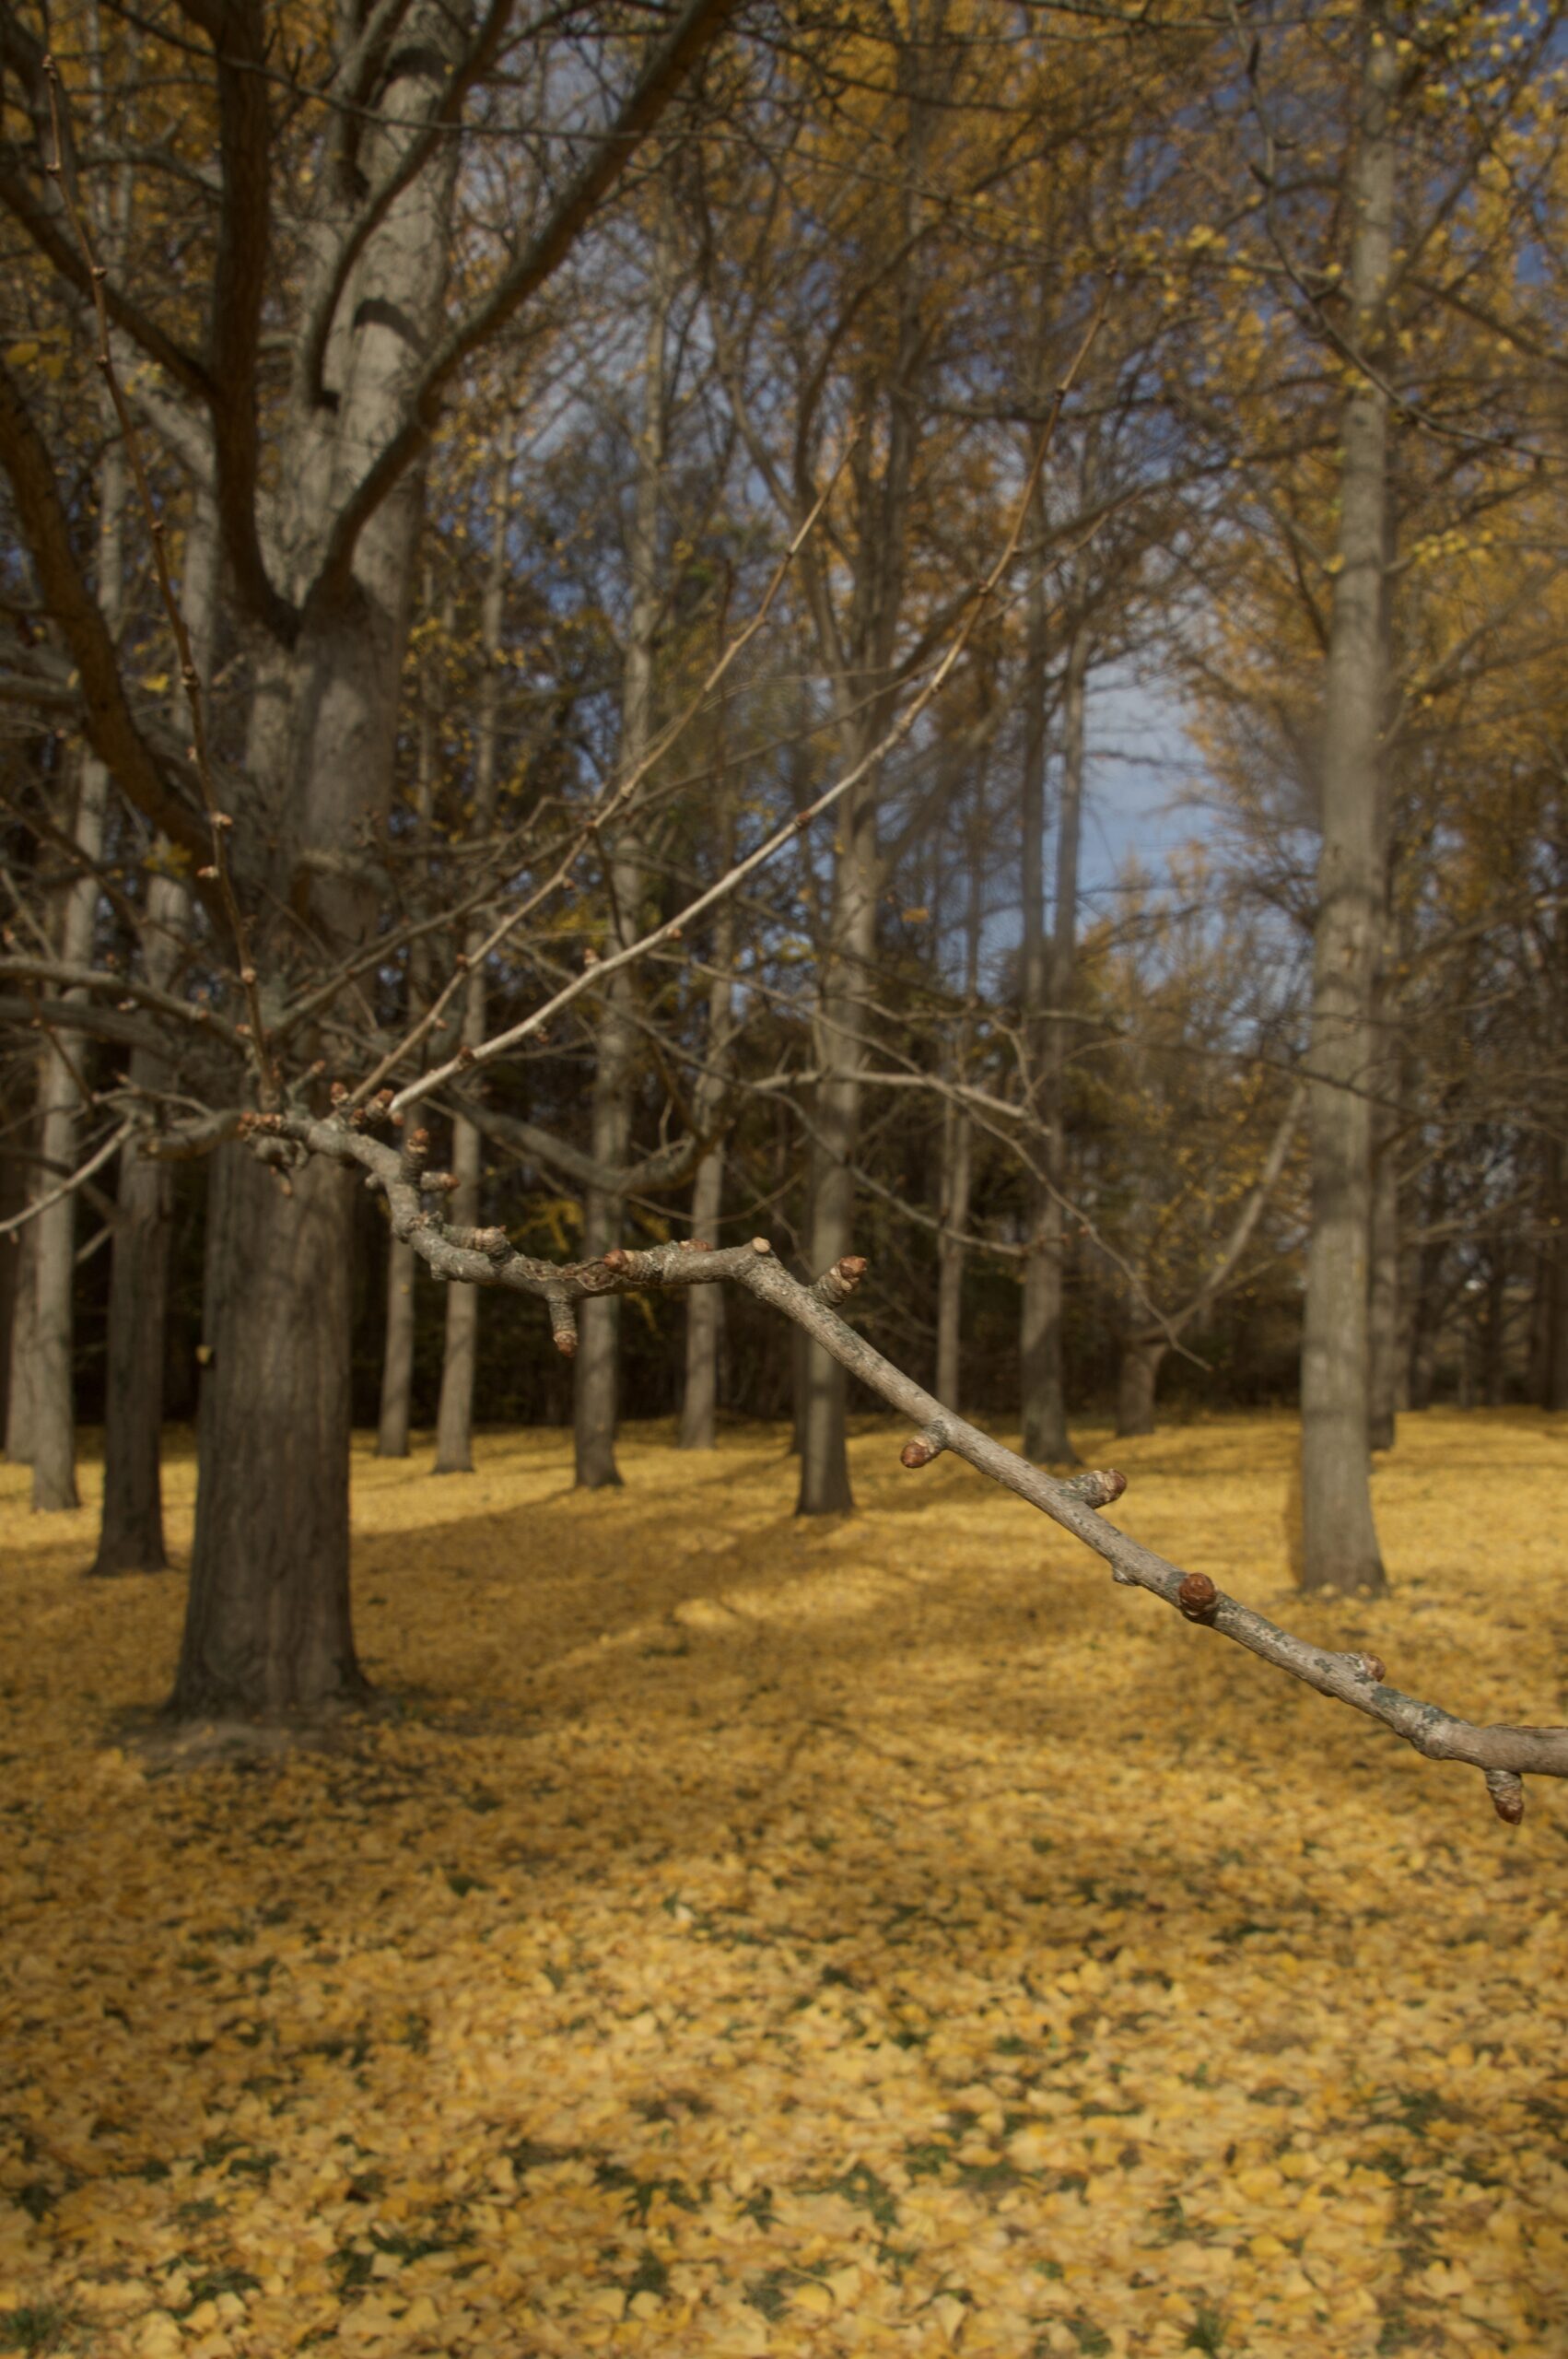 Focused image of a tree branch. Trees surrounded by fallen yellow/orange leaves